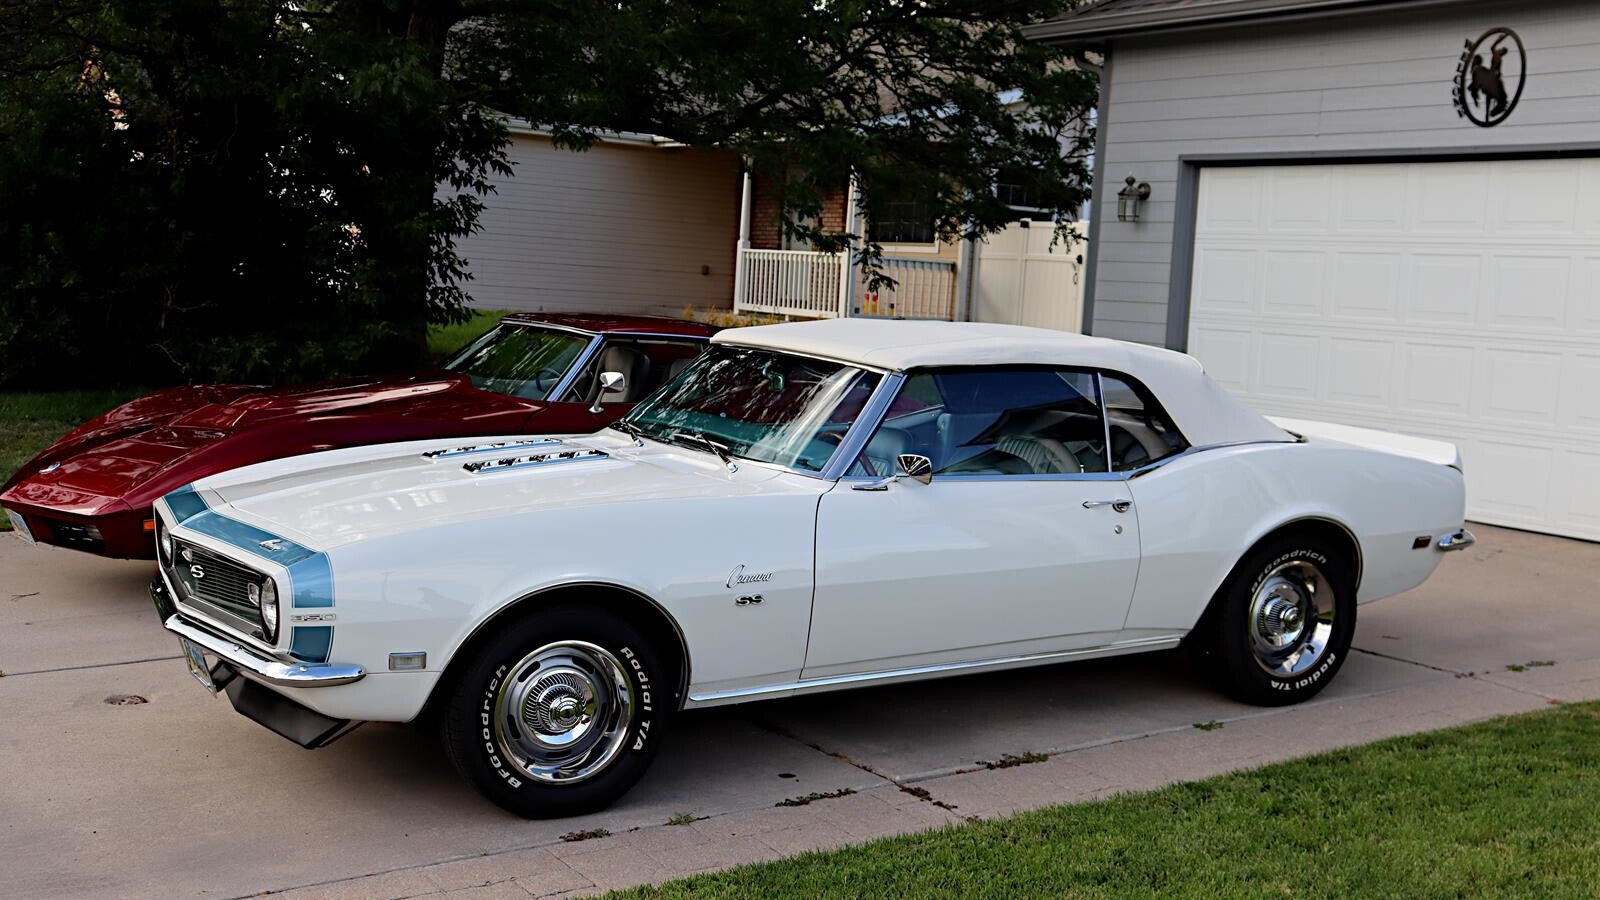 This 1968 Camero SS is part of Alex Aragon's collection.